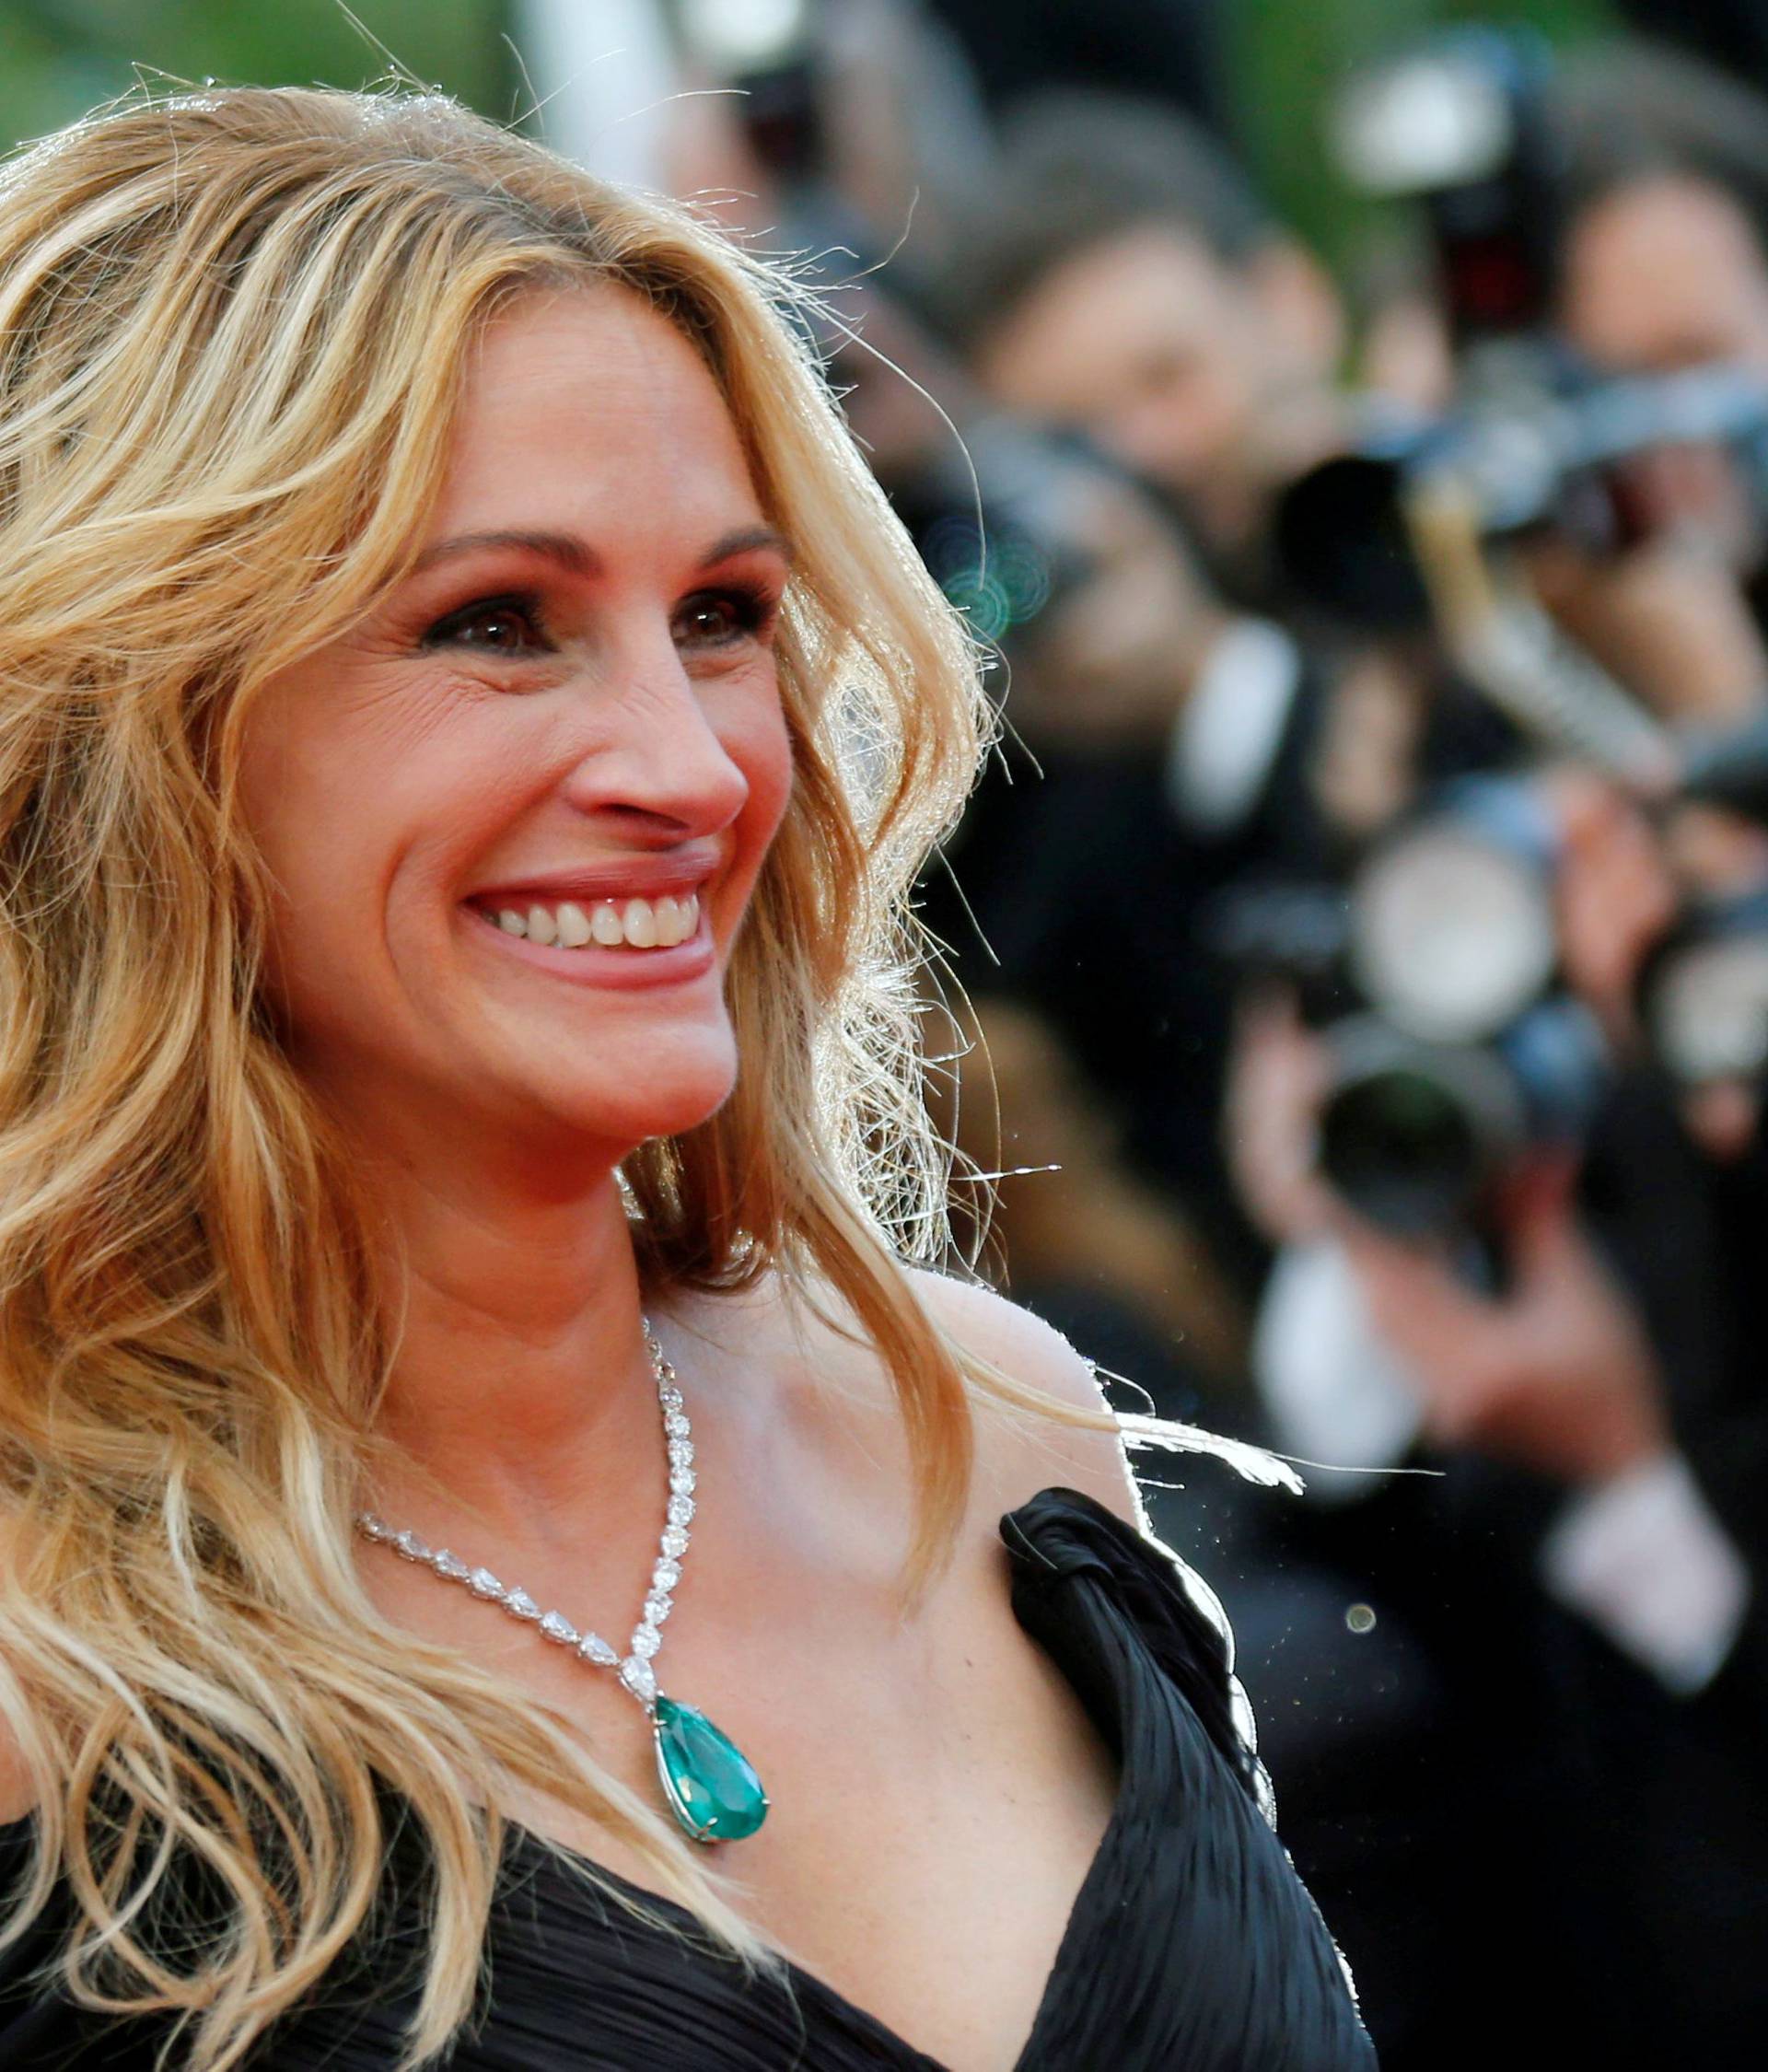 FILE PHOTO: Cast member Julia Roberts arrives for the screening of the film "Money Monster" out of competition at the 69th Cannes Film Festival in Cannes